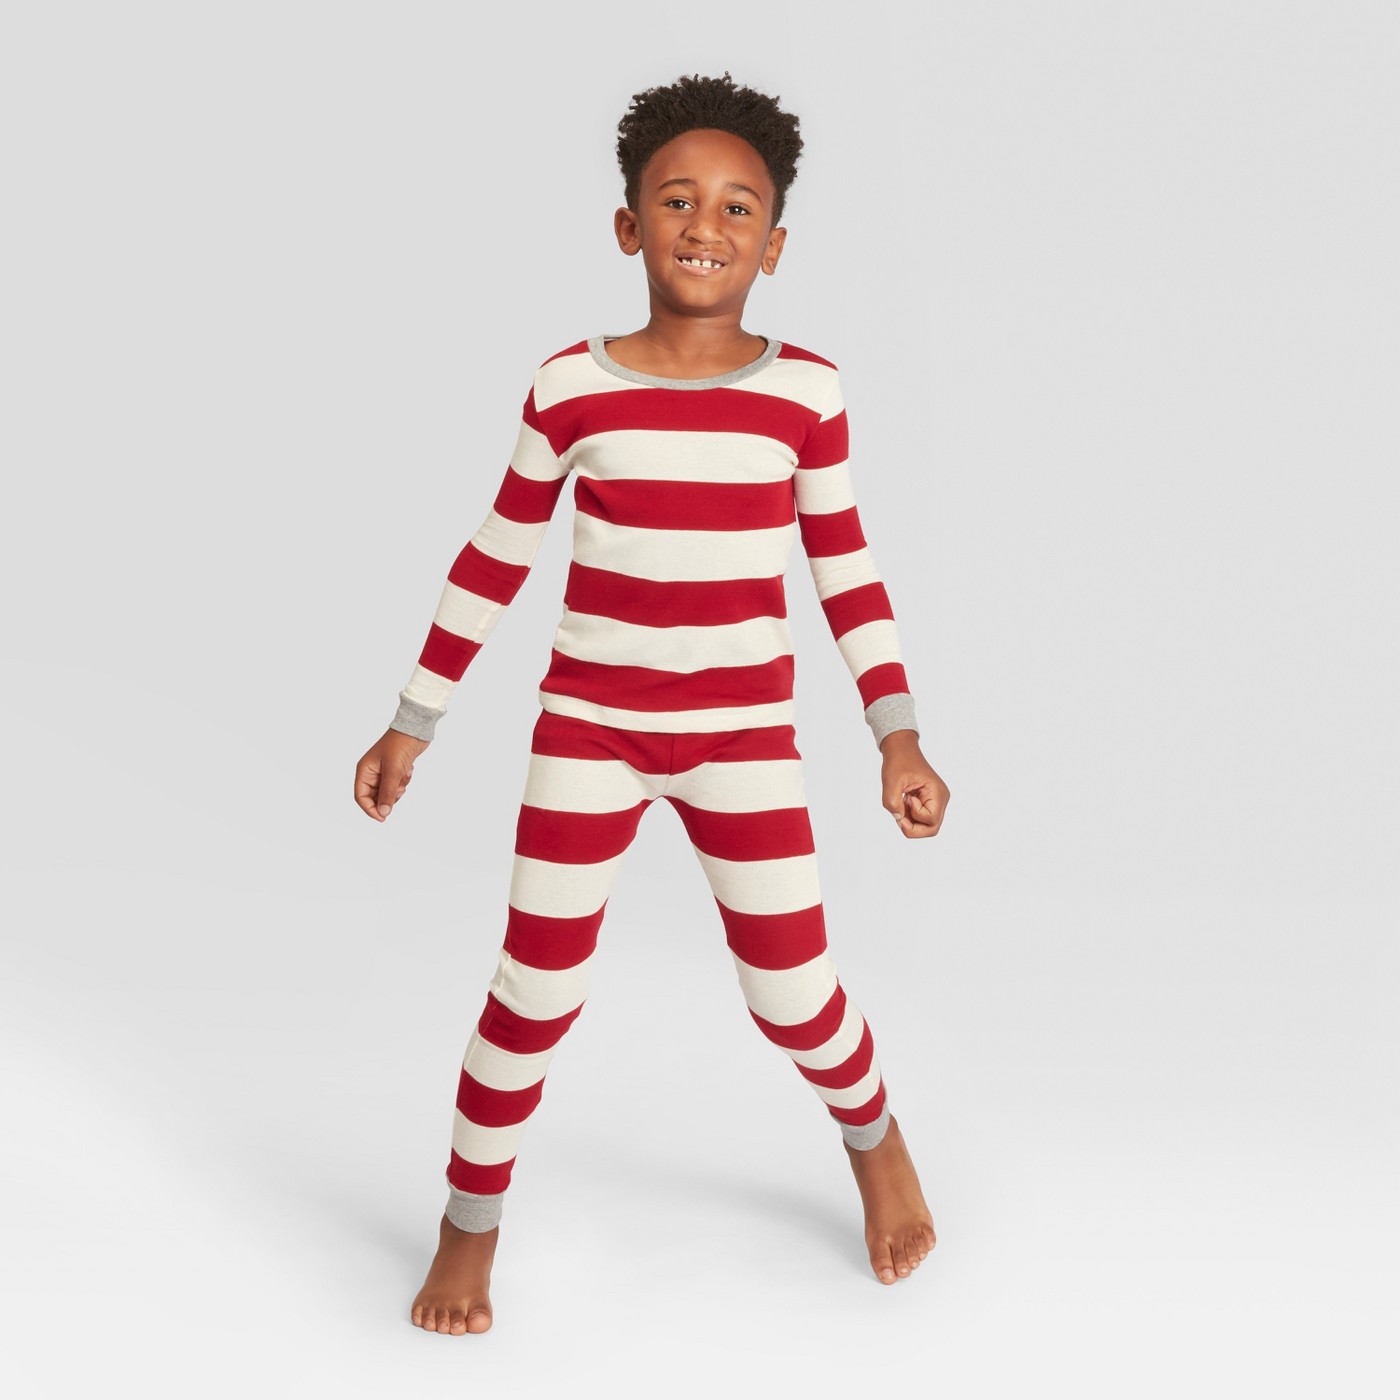 Burt's Bees Baby Kid's Striped Holiday Rugby Pajama Set - Red XS - image 1 of 3